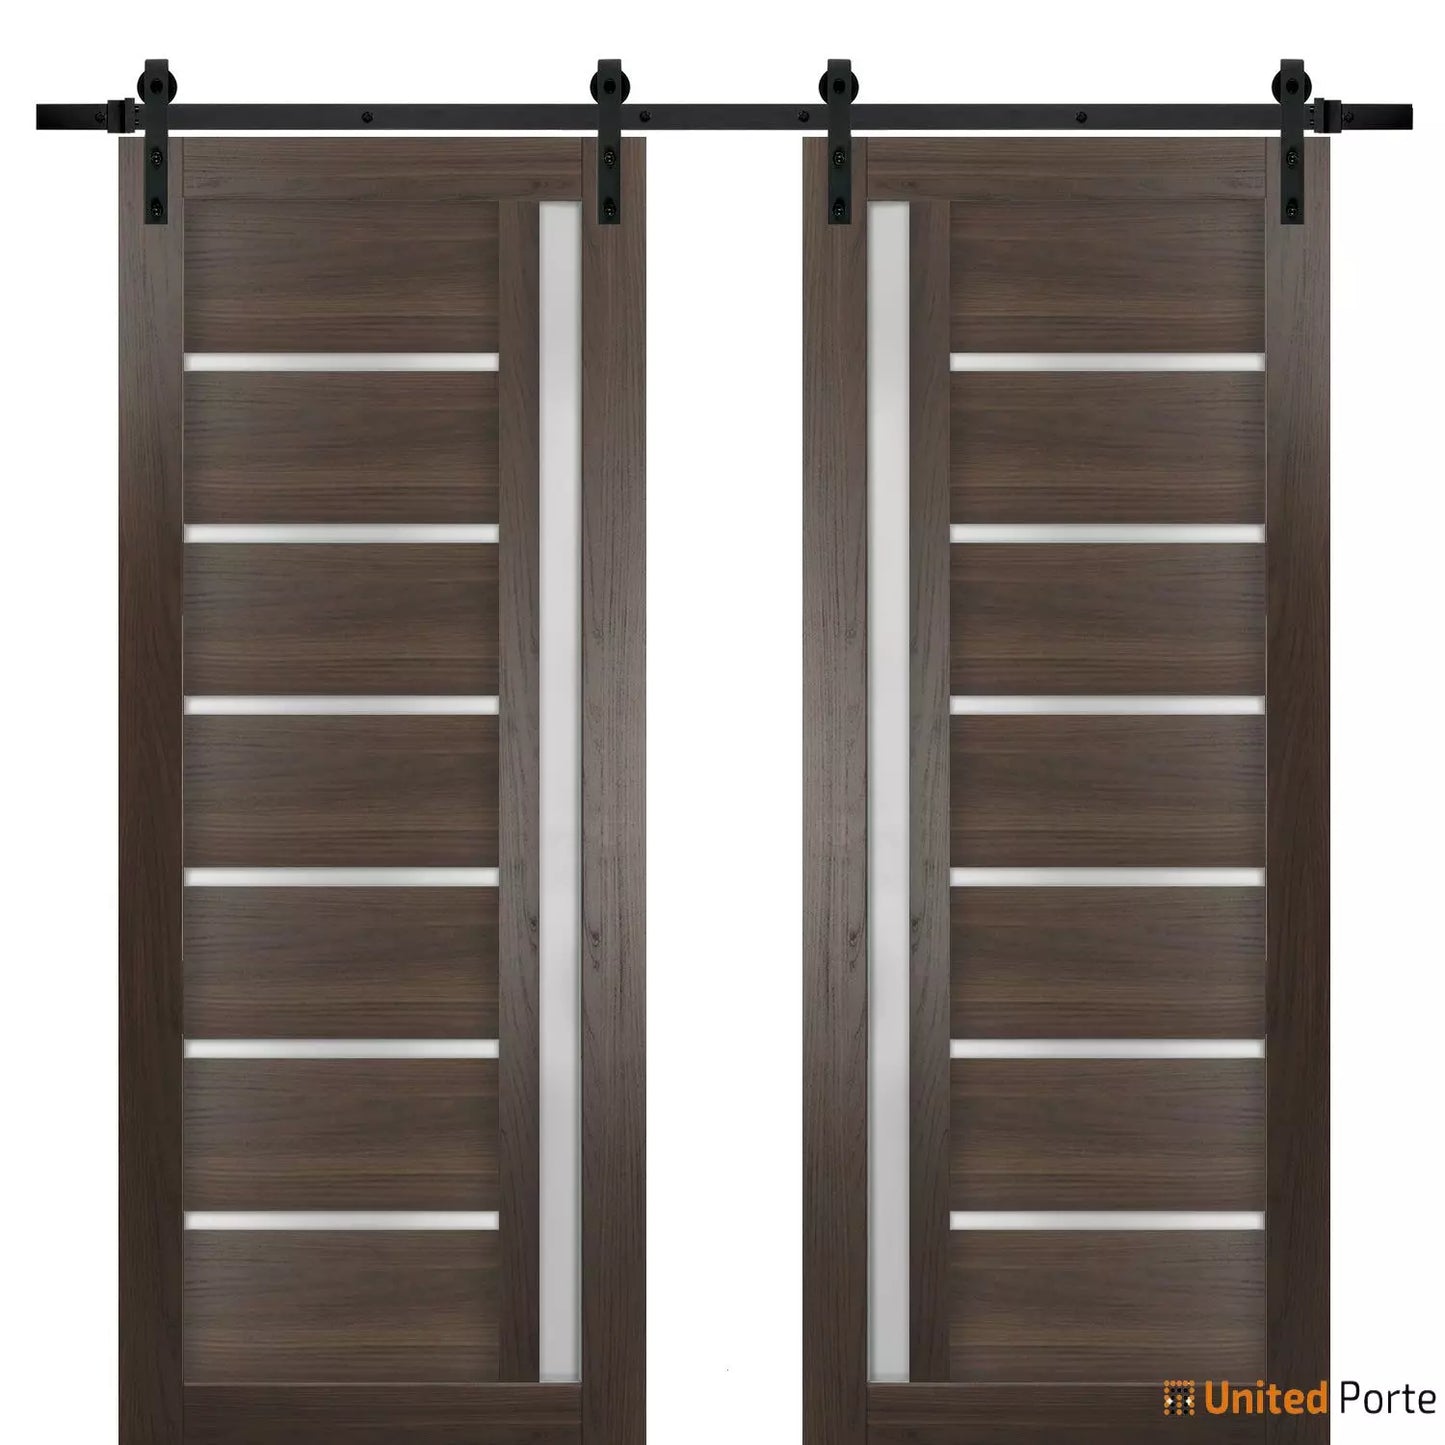 Quadro 4088 Chocolate Ash Double Barn Door with Frosted Glass | Black Rail